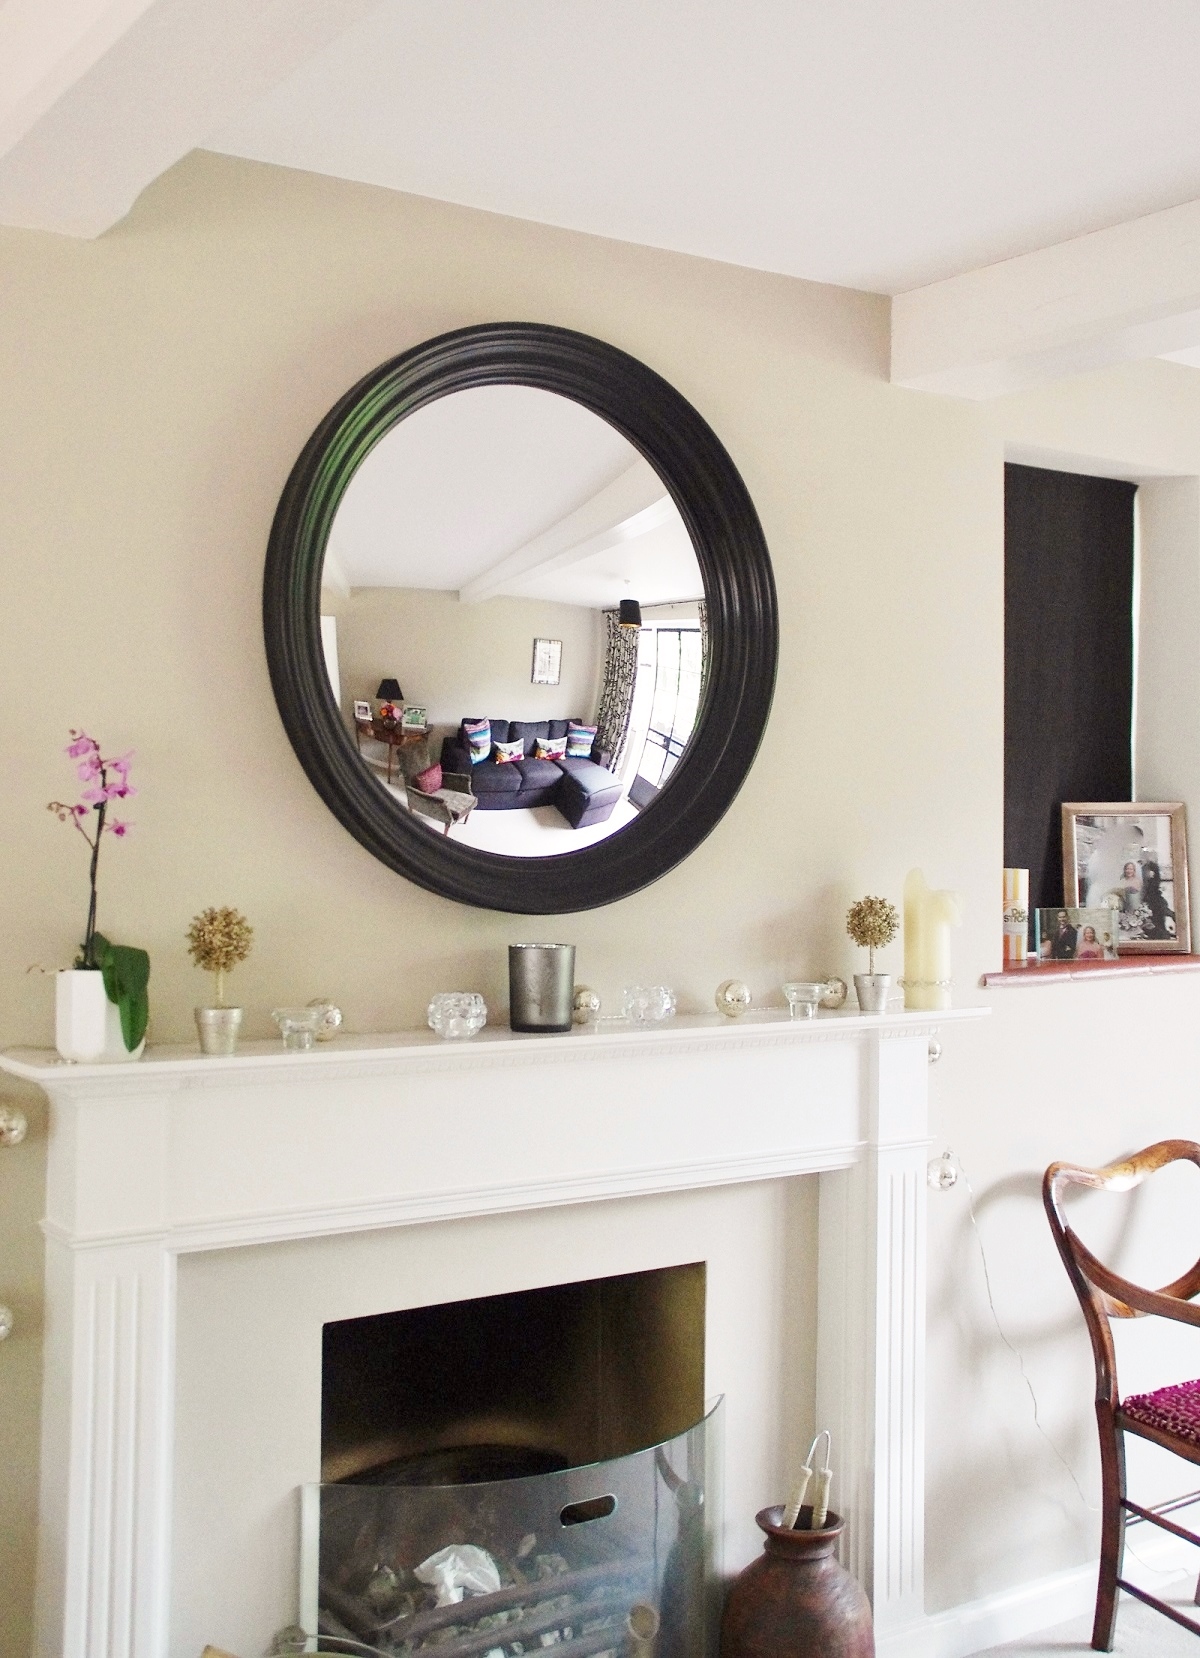 4 Essential Tips for Hanging a Round Mirror  above  a 